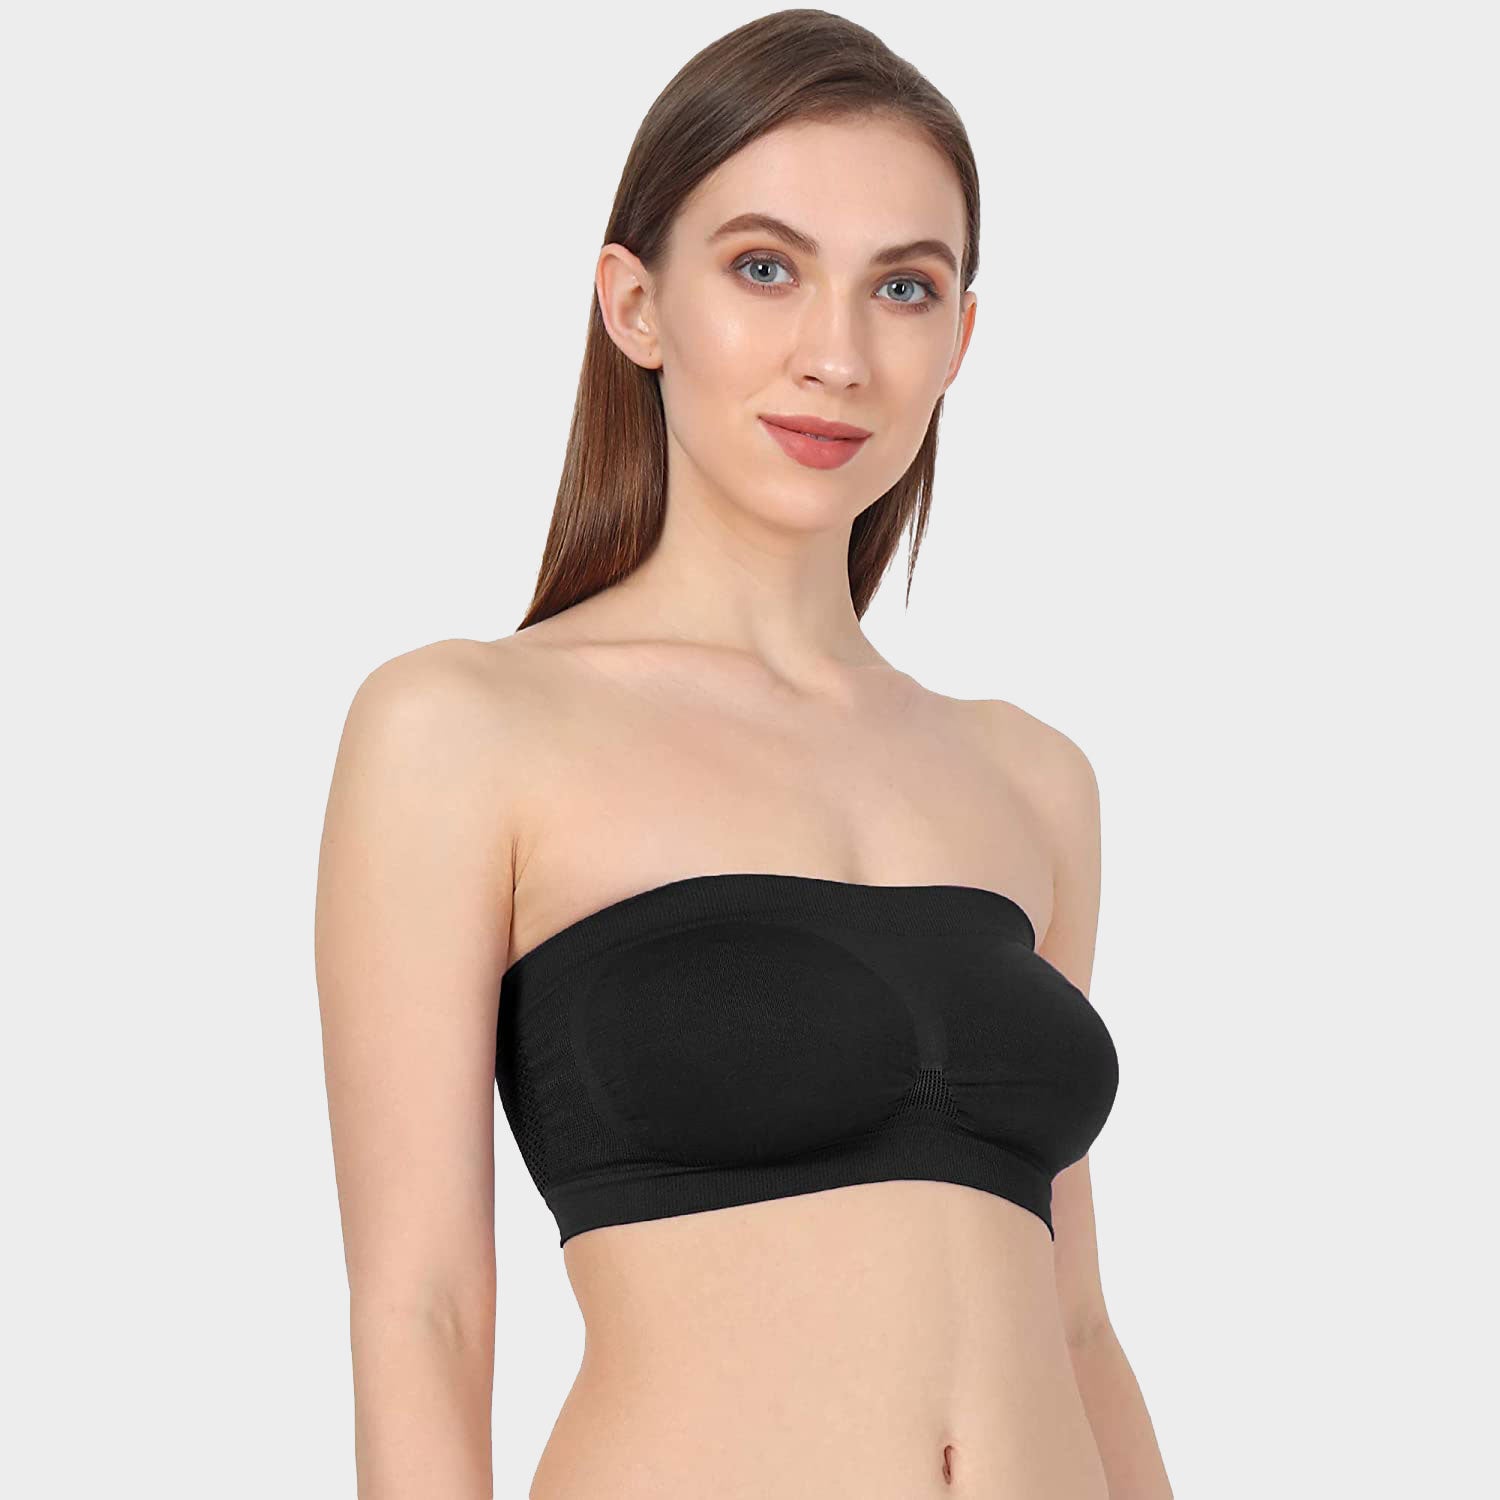 Comfortable and Stylish: The Cotton Tube Bra for Trendy Teen Girls